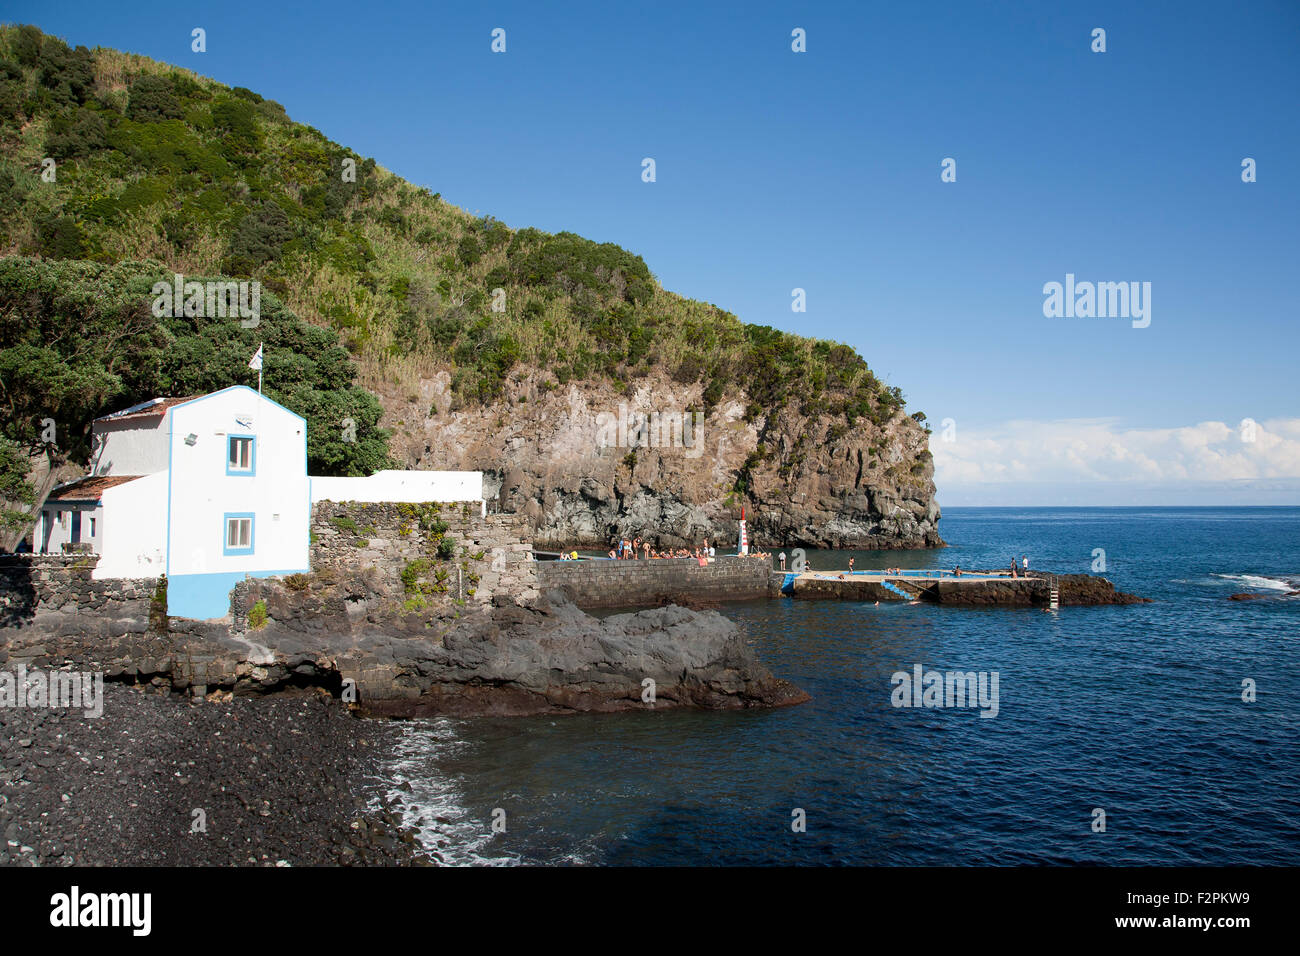 The harbour of Caloura in a hot Summer day. Sao Miguel island, Azores islands, Portugal. Stock Photo